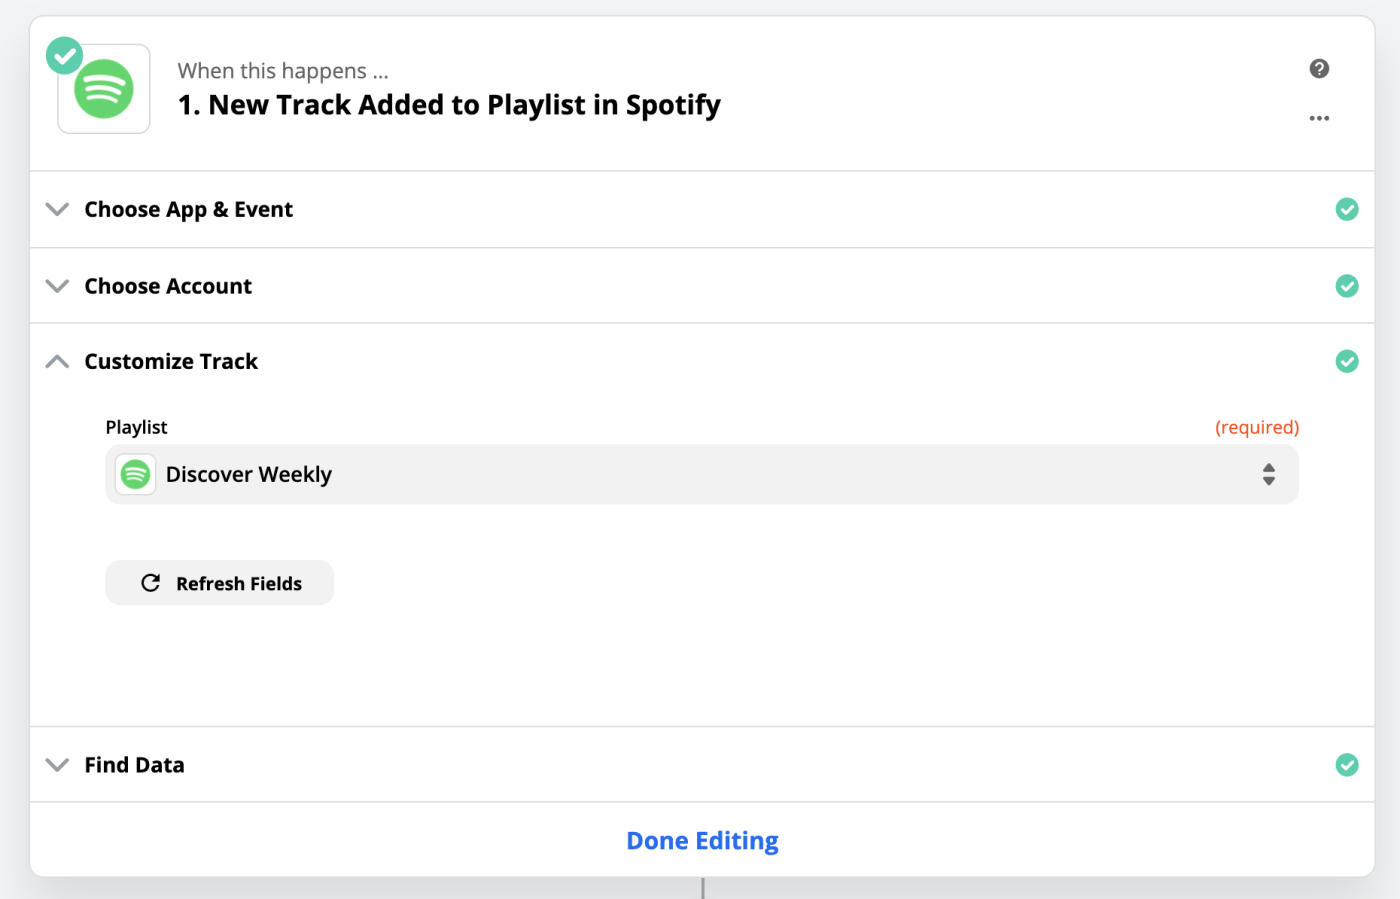 Selecting the Discover Weekly playlist to customize your track info.